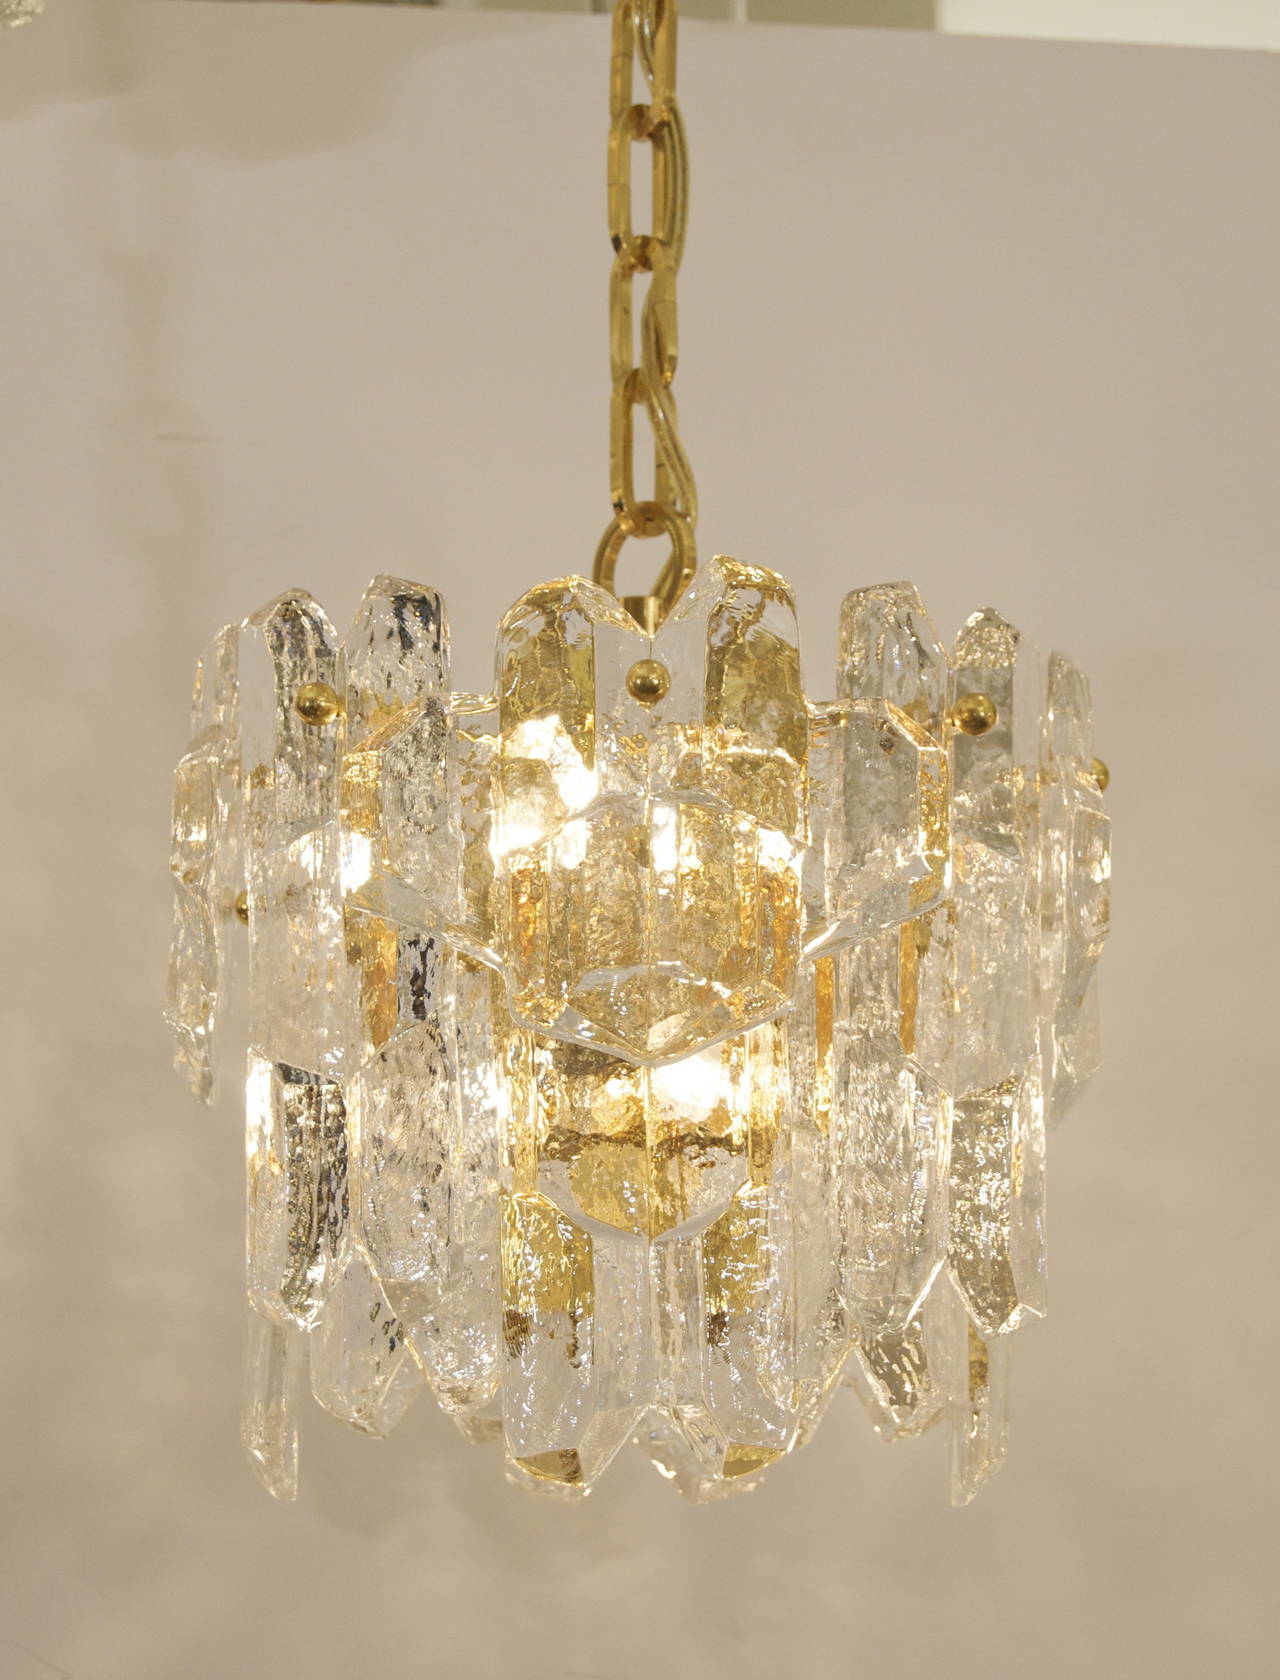 Exceptionally lustrous Kalmar ice glass chandelier, a rare pendant version with three separate patterns of glass hung from a gold-plated body. The angular structure and patterning of the glass creates a bold visual statement.

Takes eight E-14